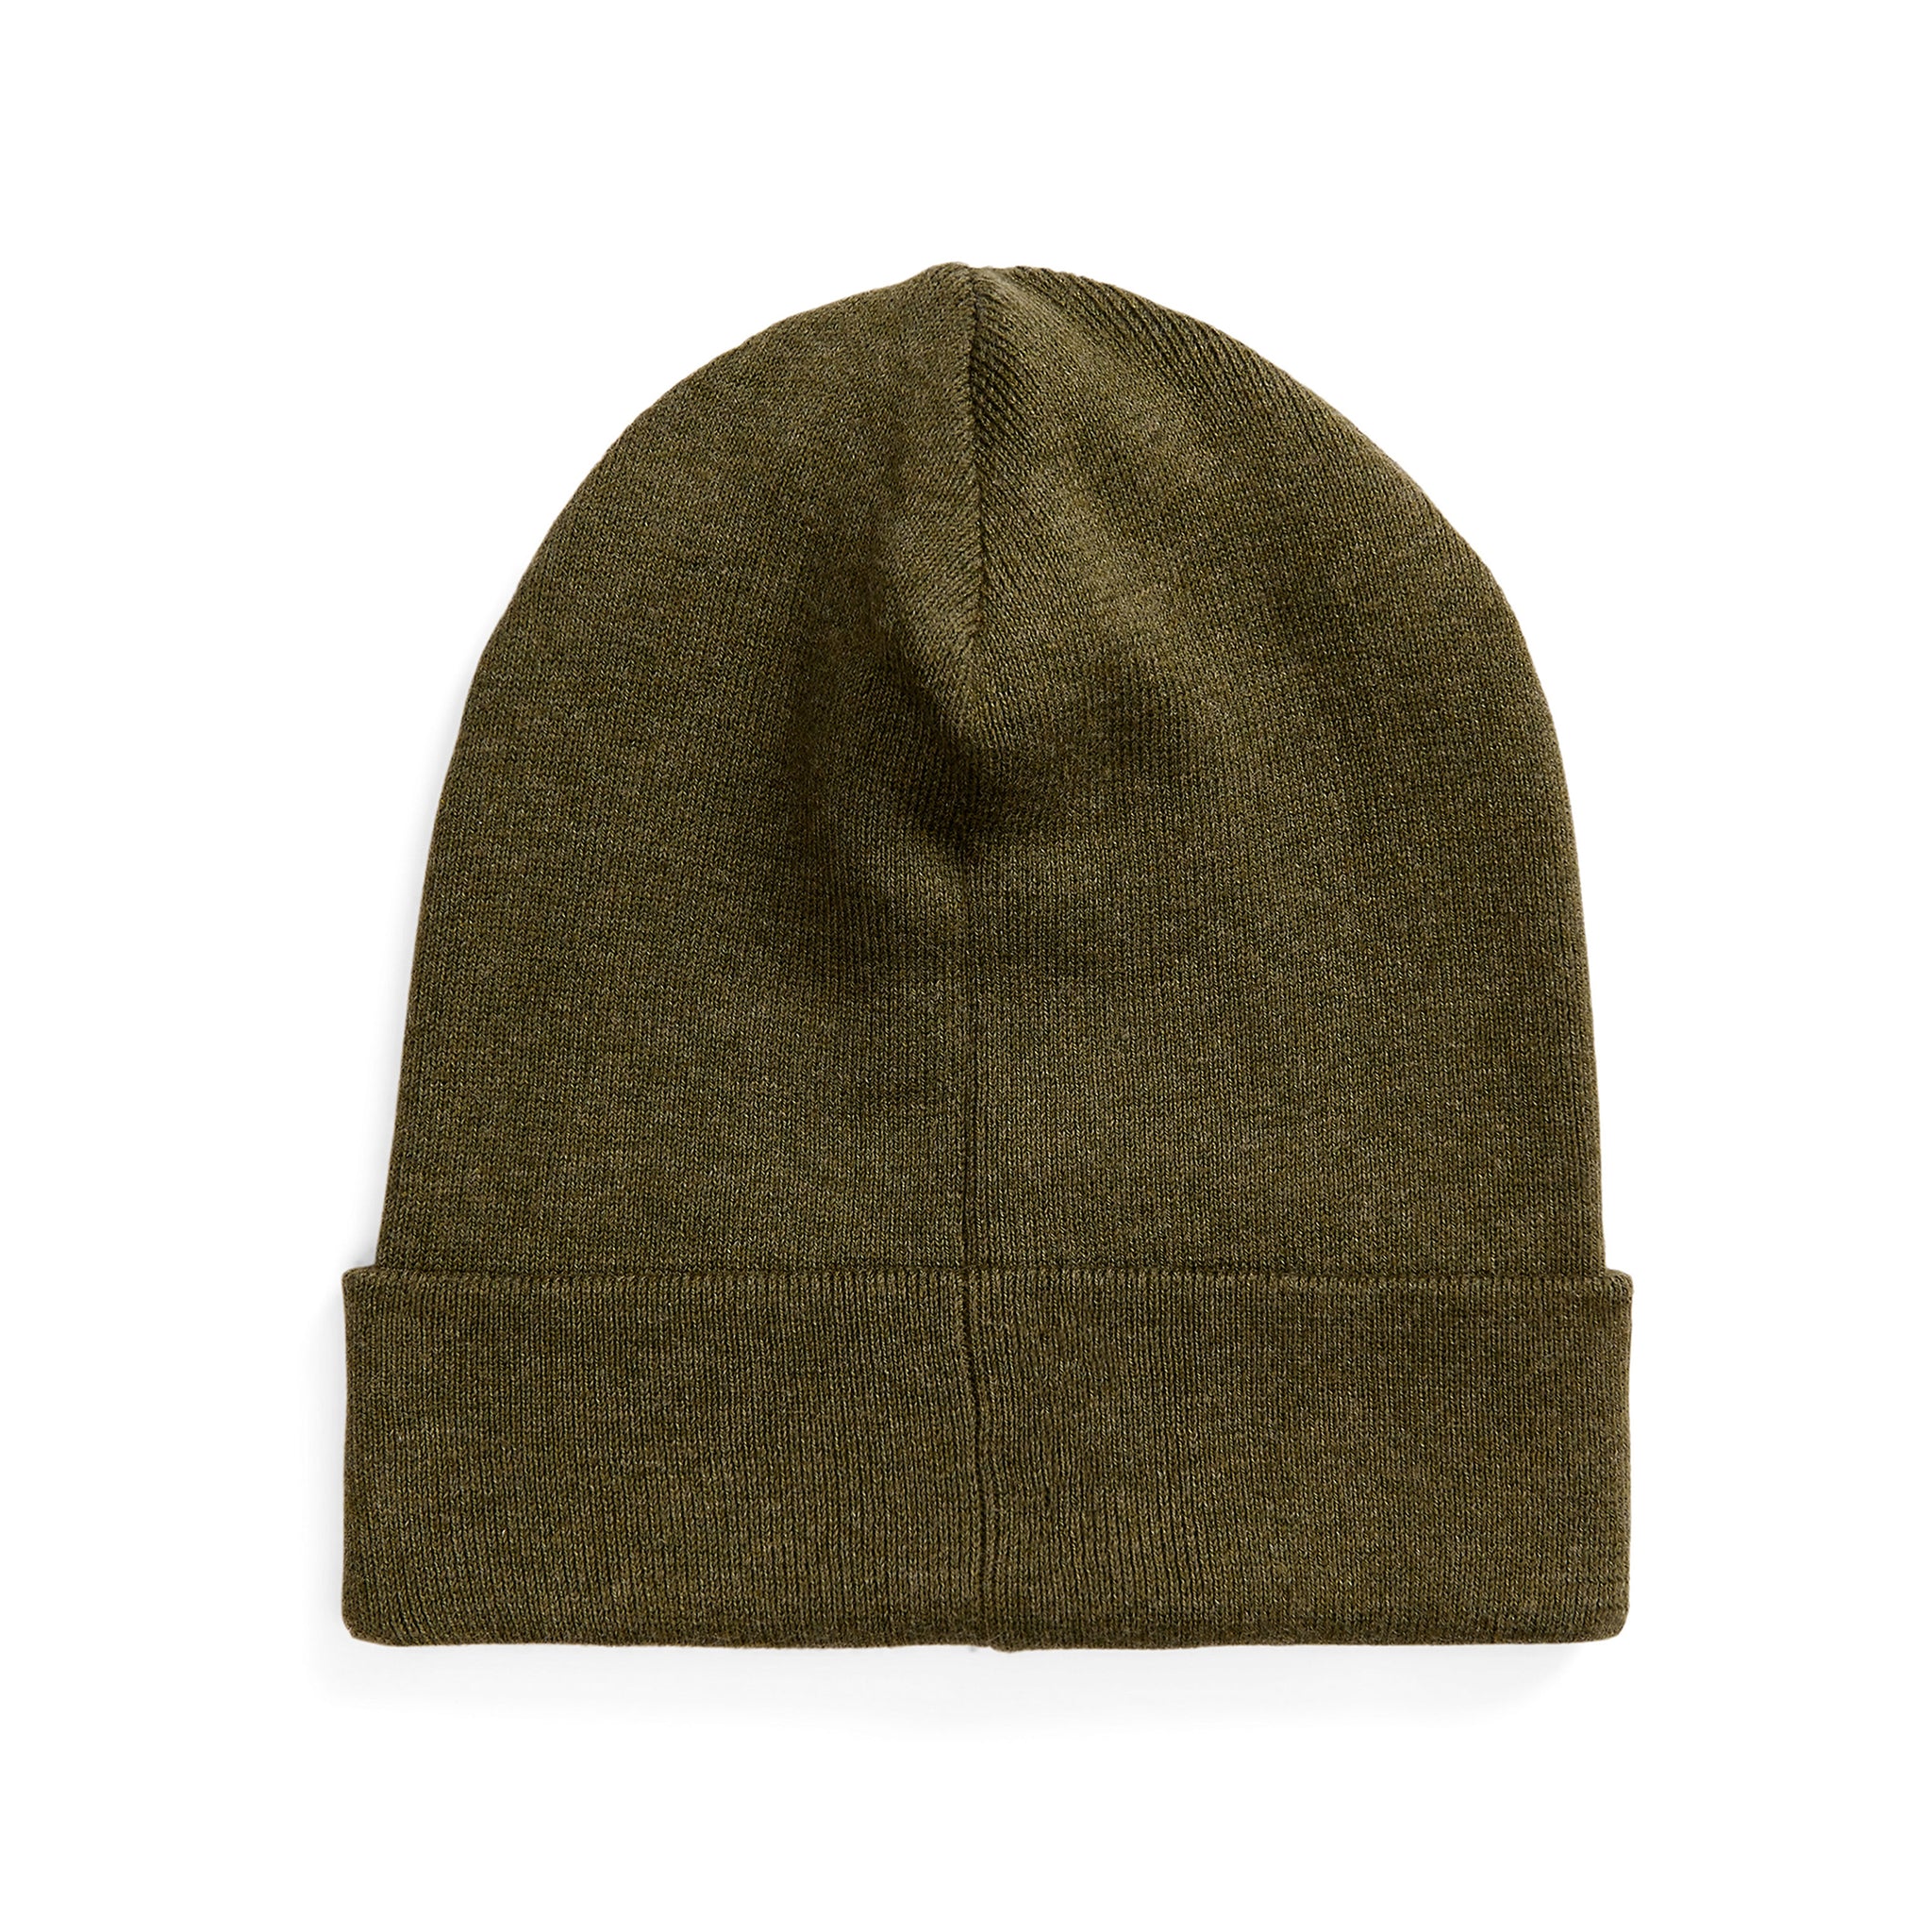 polo-ralph-lauren-ribbed-cotton-hat-710886138-drab-olive-heather-004